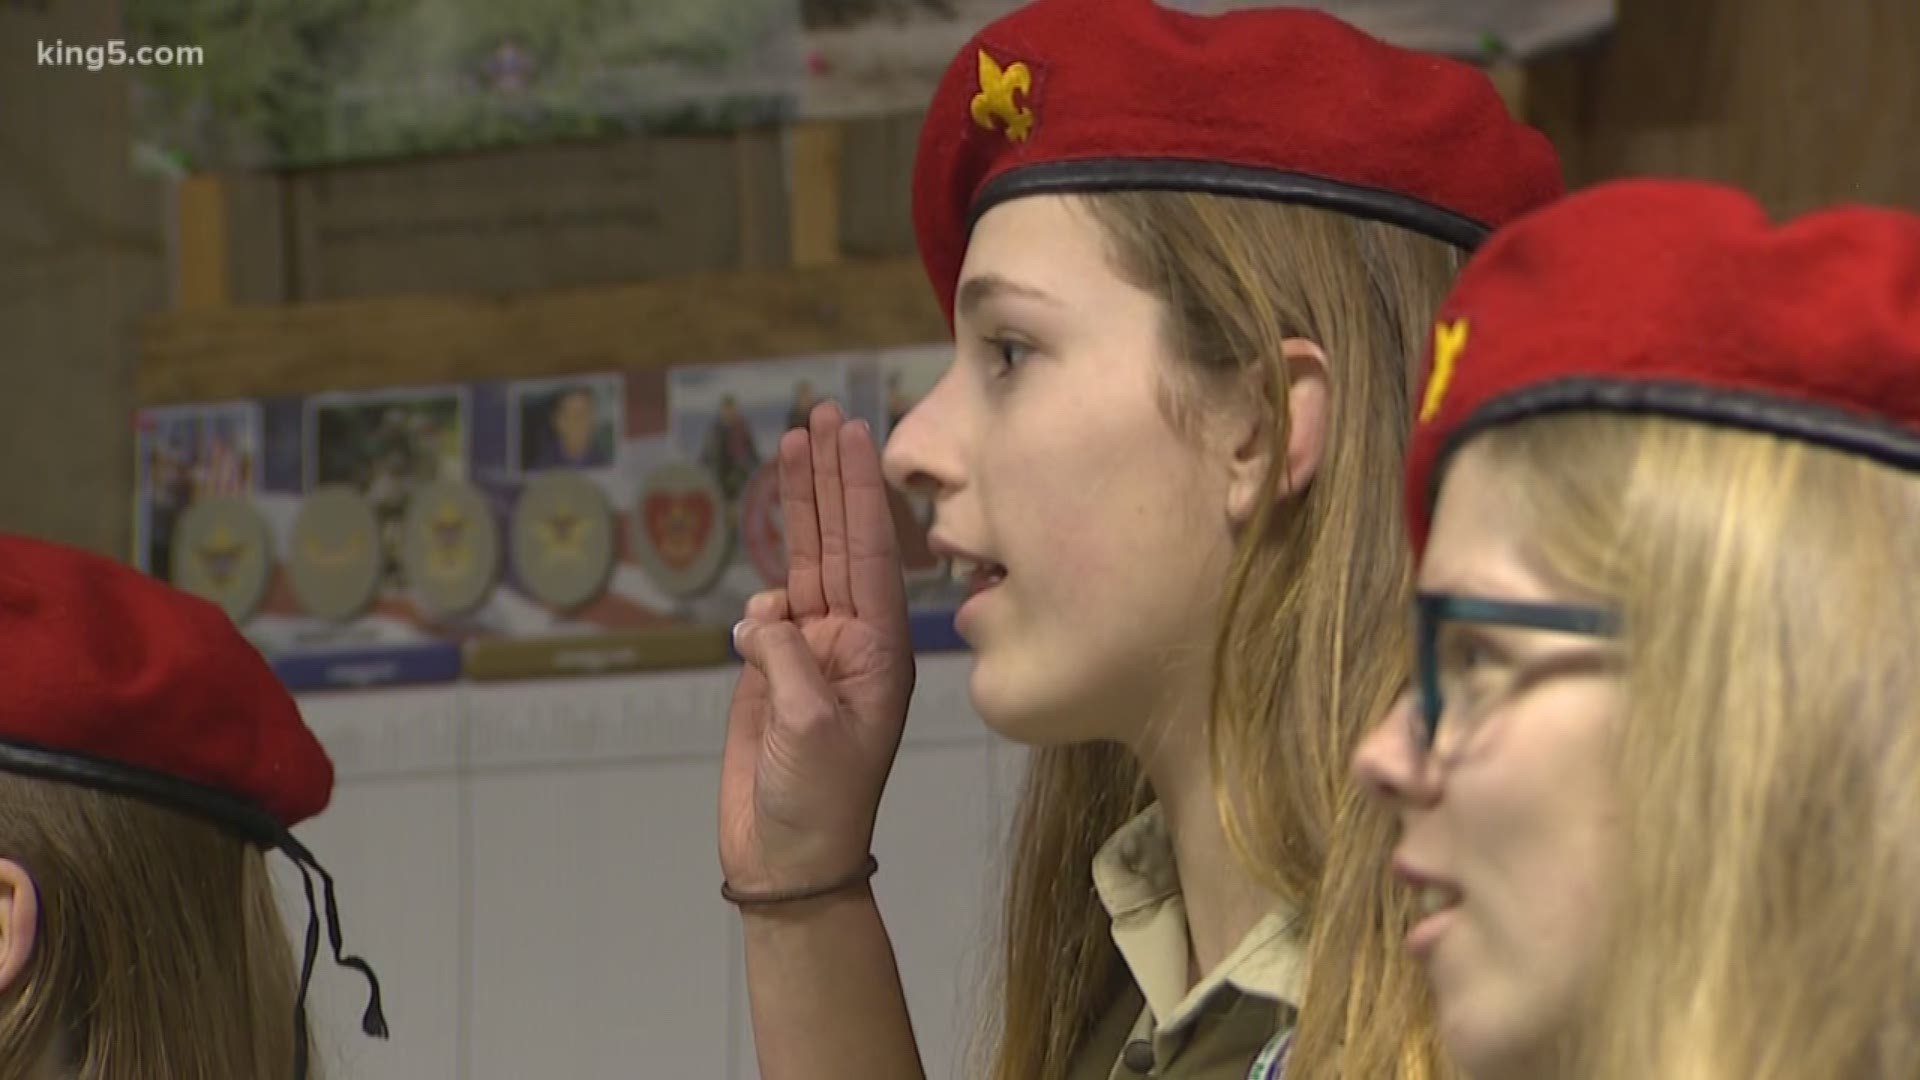 The Boy Scouts of America are taking a big step forward in February as the organization will start to allow girls in. KING 5's Jenna Hanchard tells us about the push for progress.